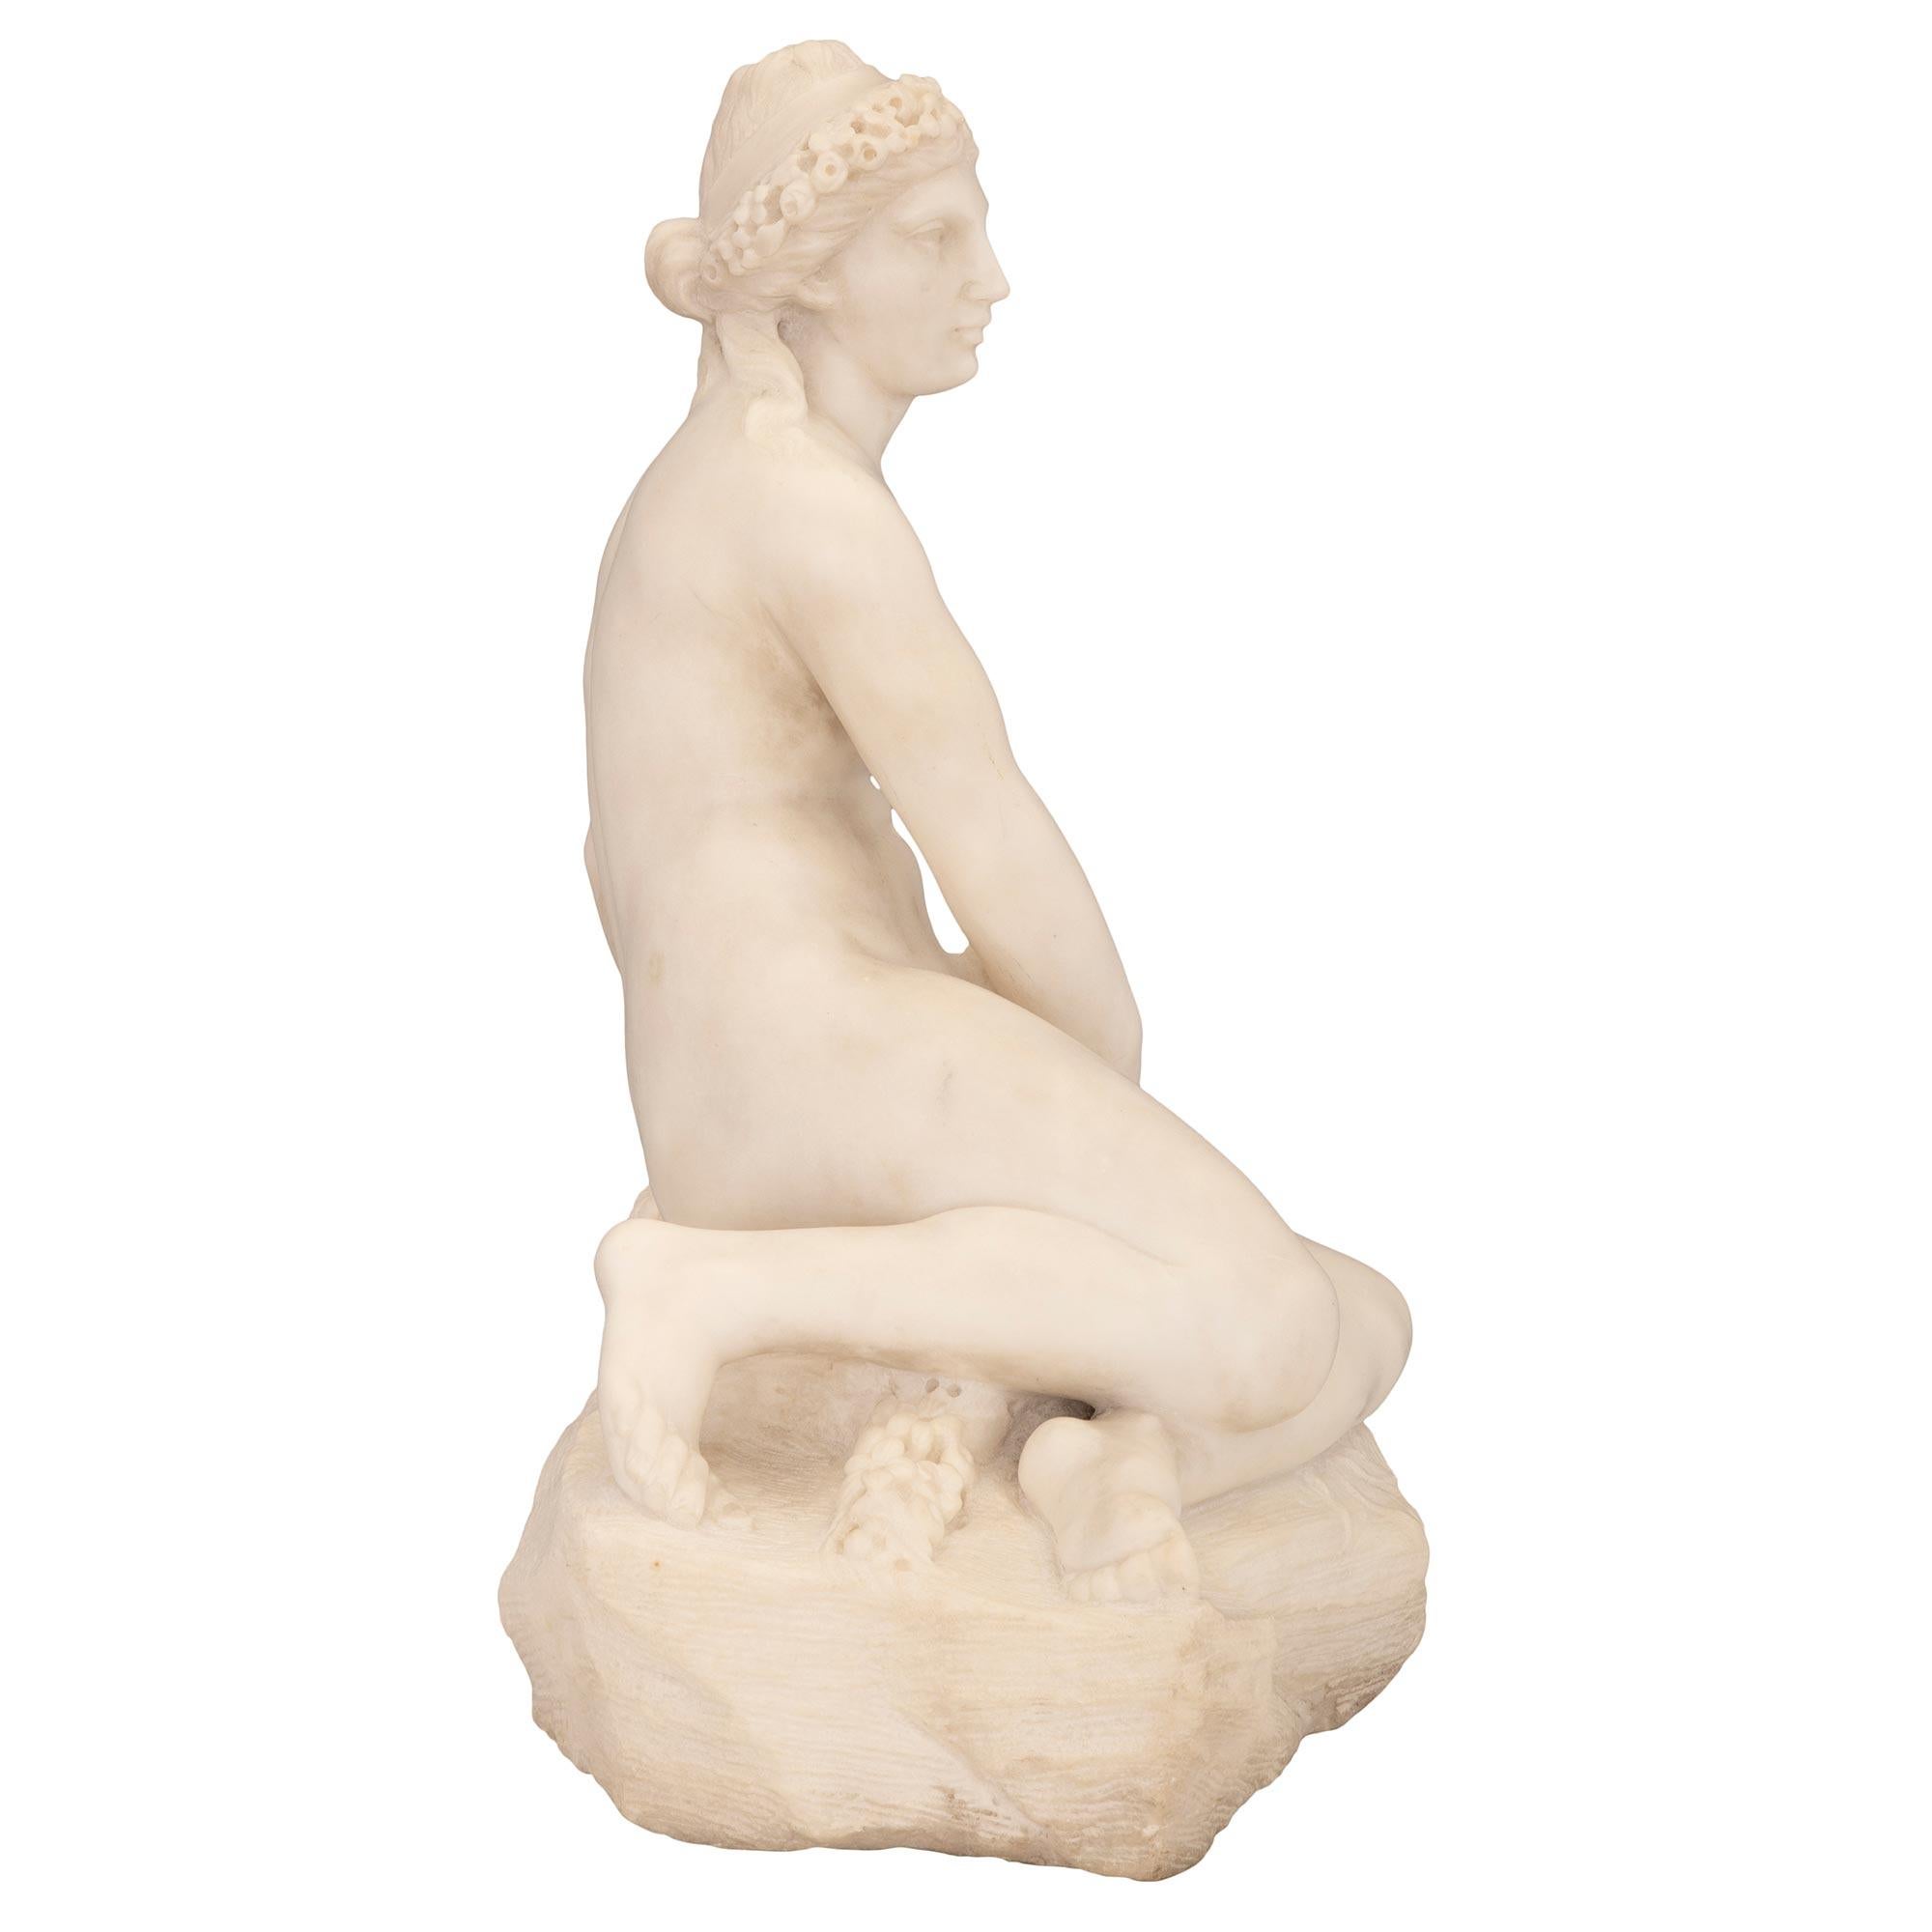 Italian 19th Century White Carrara Marble Statue In Good Condition For Sale In West Palm Beach, FL